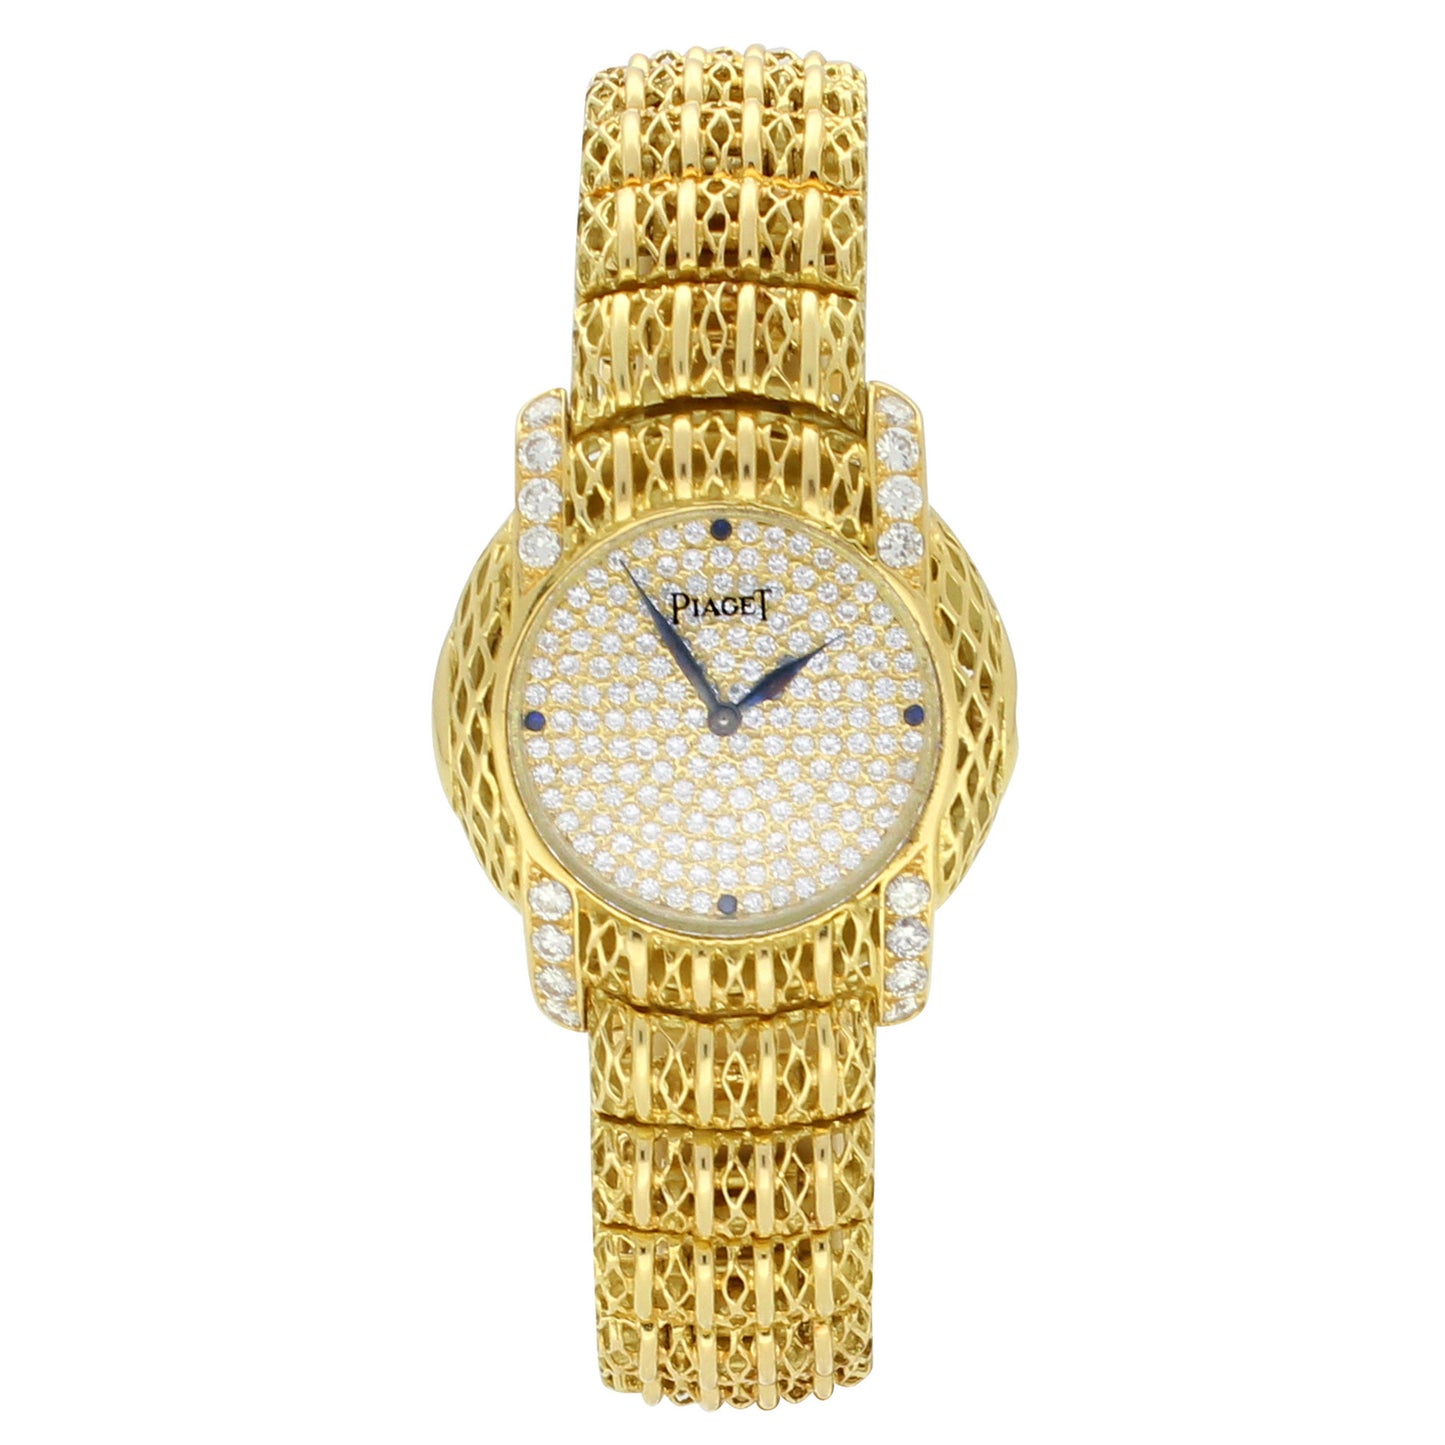 18ct yellow gold 'round cased' bracelet watch with diamond set dial and diamond set lugs. Made 1980s